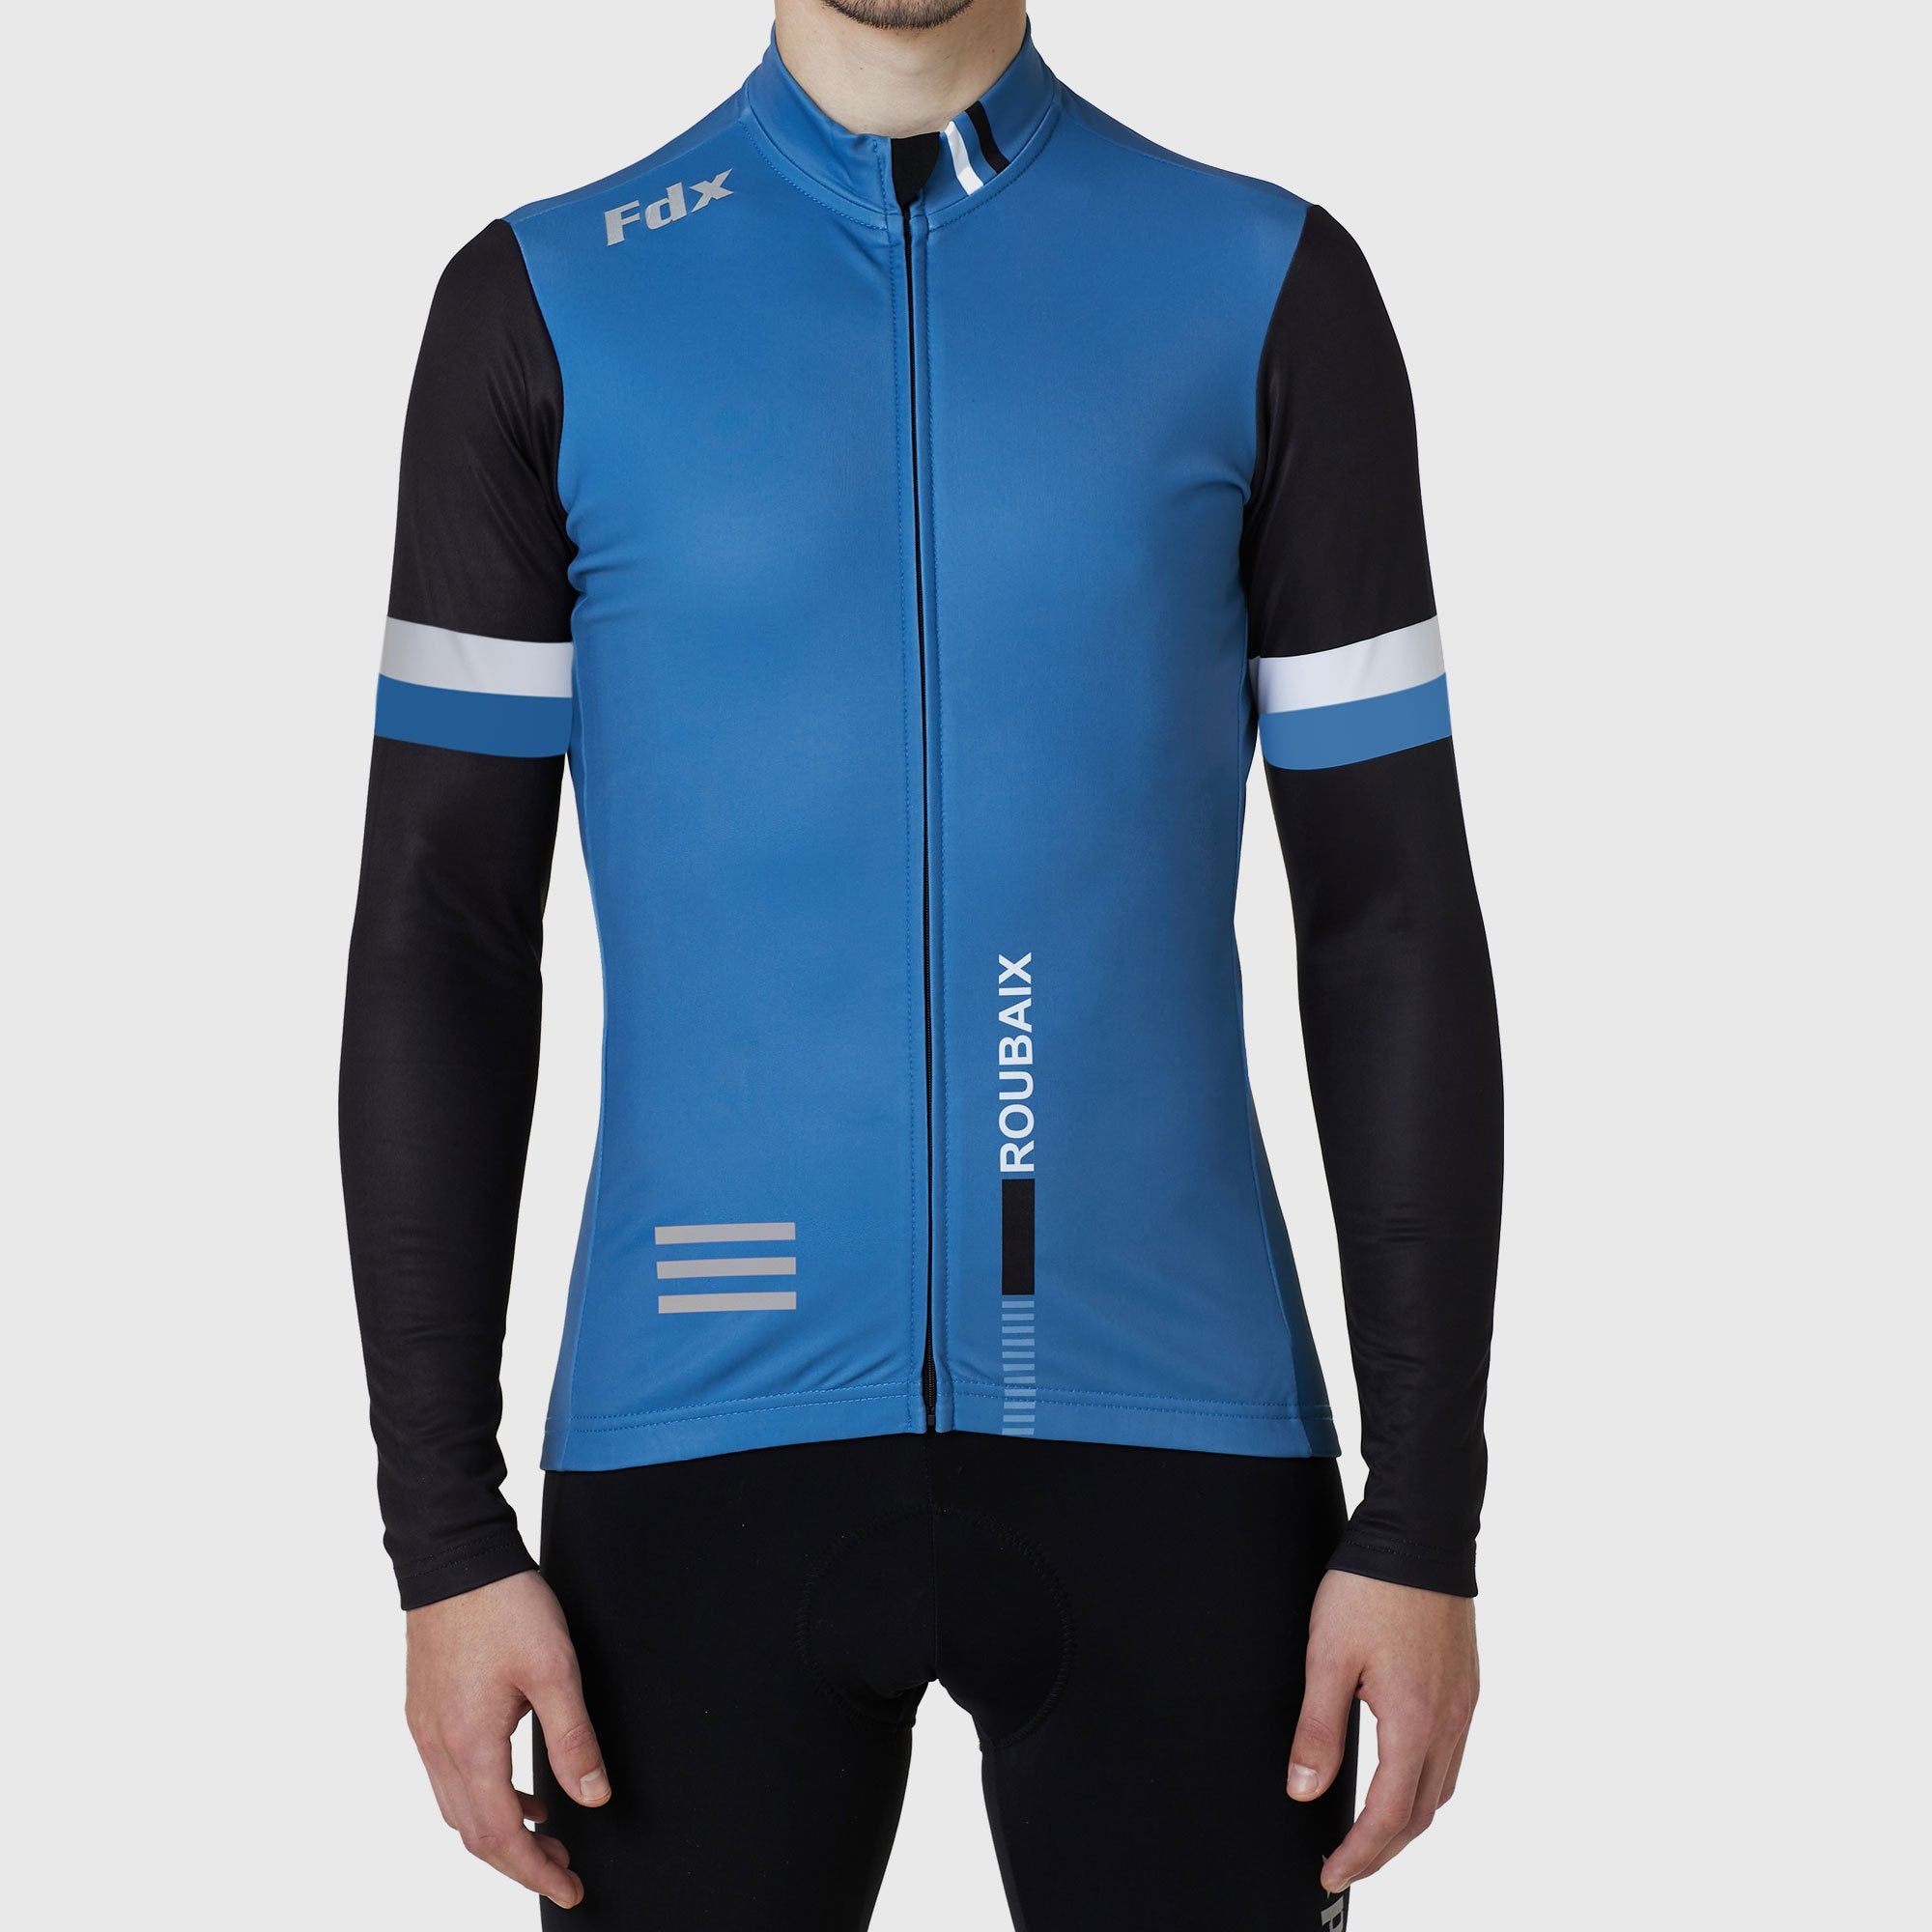 Fdx Limited Edition Blue Men\'s Sleeve Thermal Sports® | FDX Cycling FDX Long - Jersey US Sports